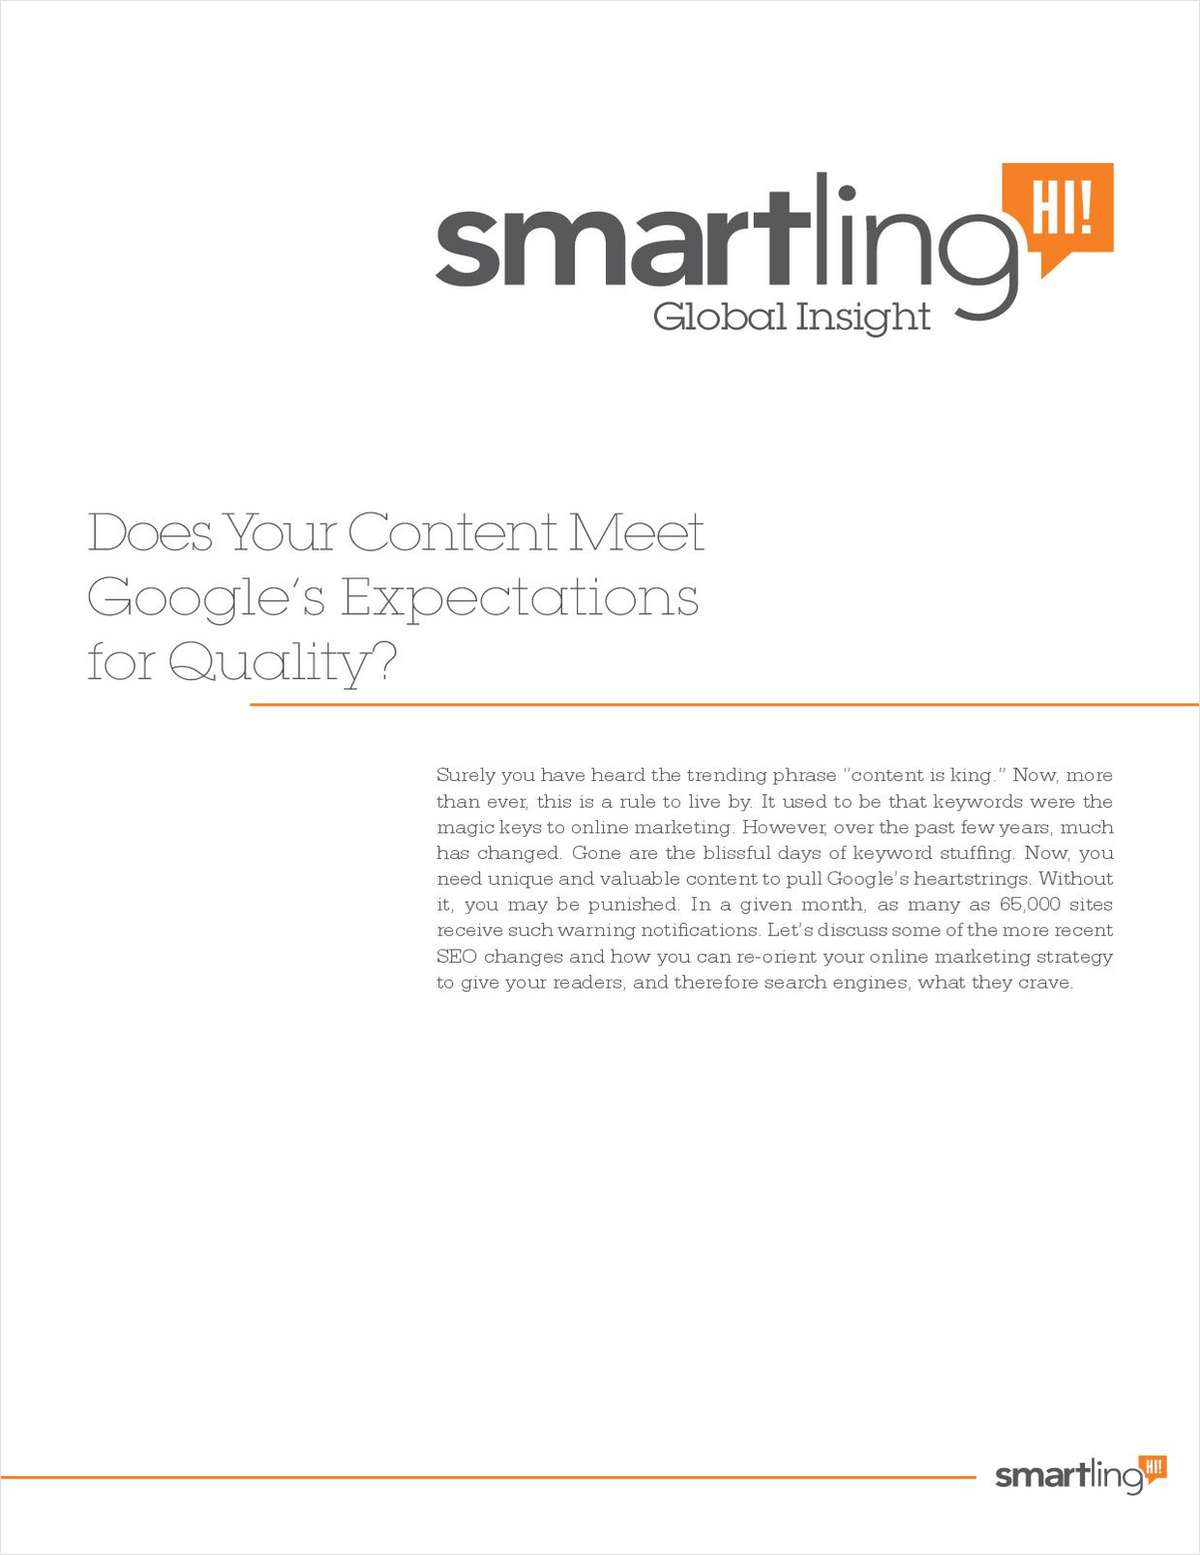 Does Your Content Meet Google's Expectations for Quality?